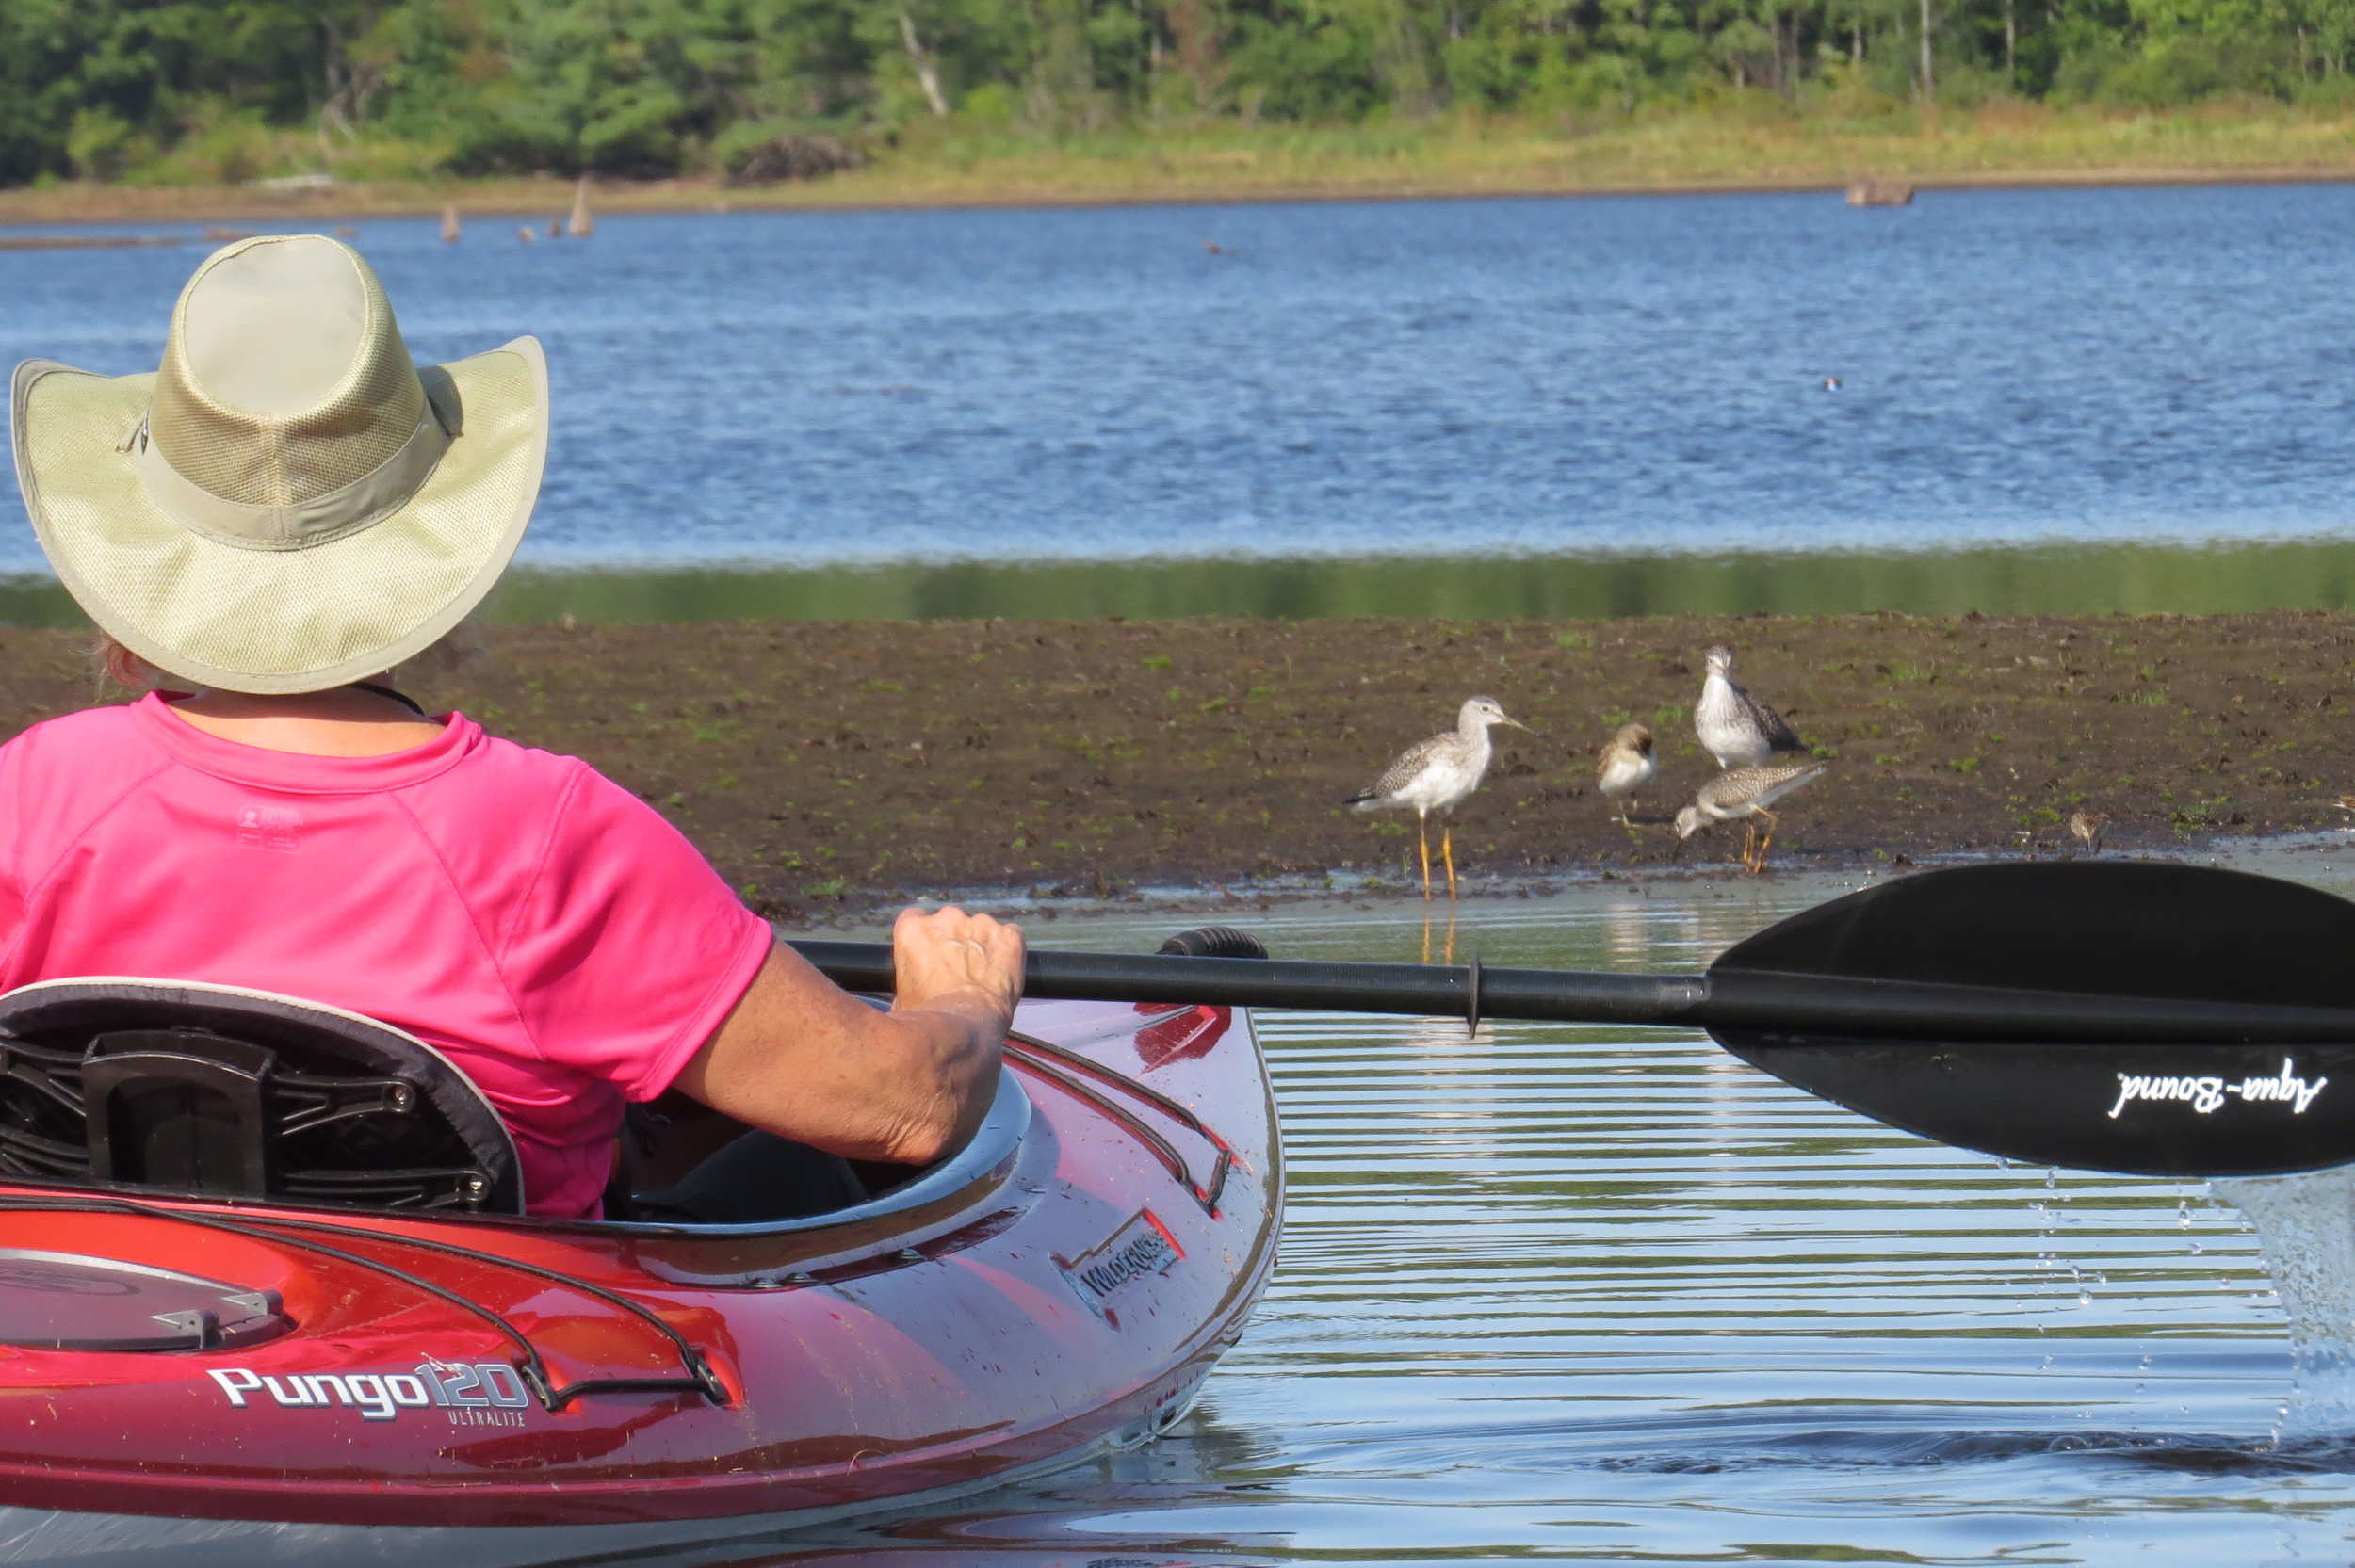 A kayaker in a sun hat watches shorebirds from their boat. (photo © Meade Cadot)